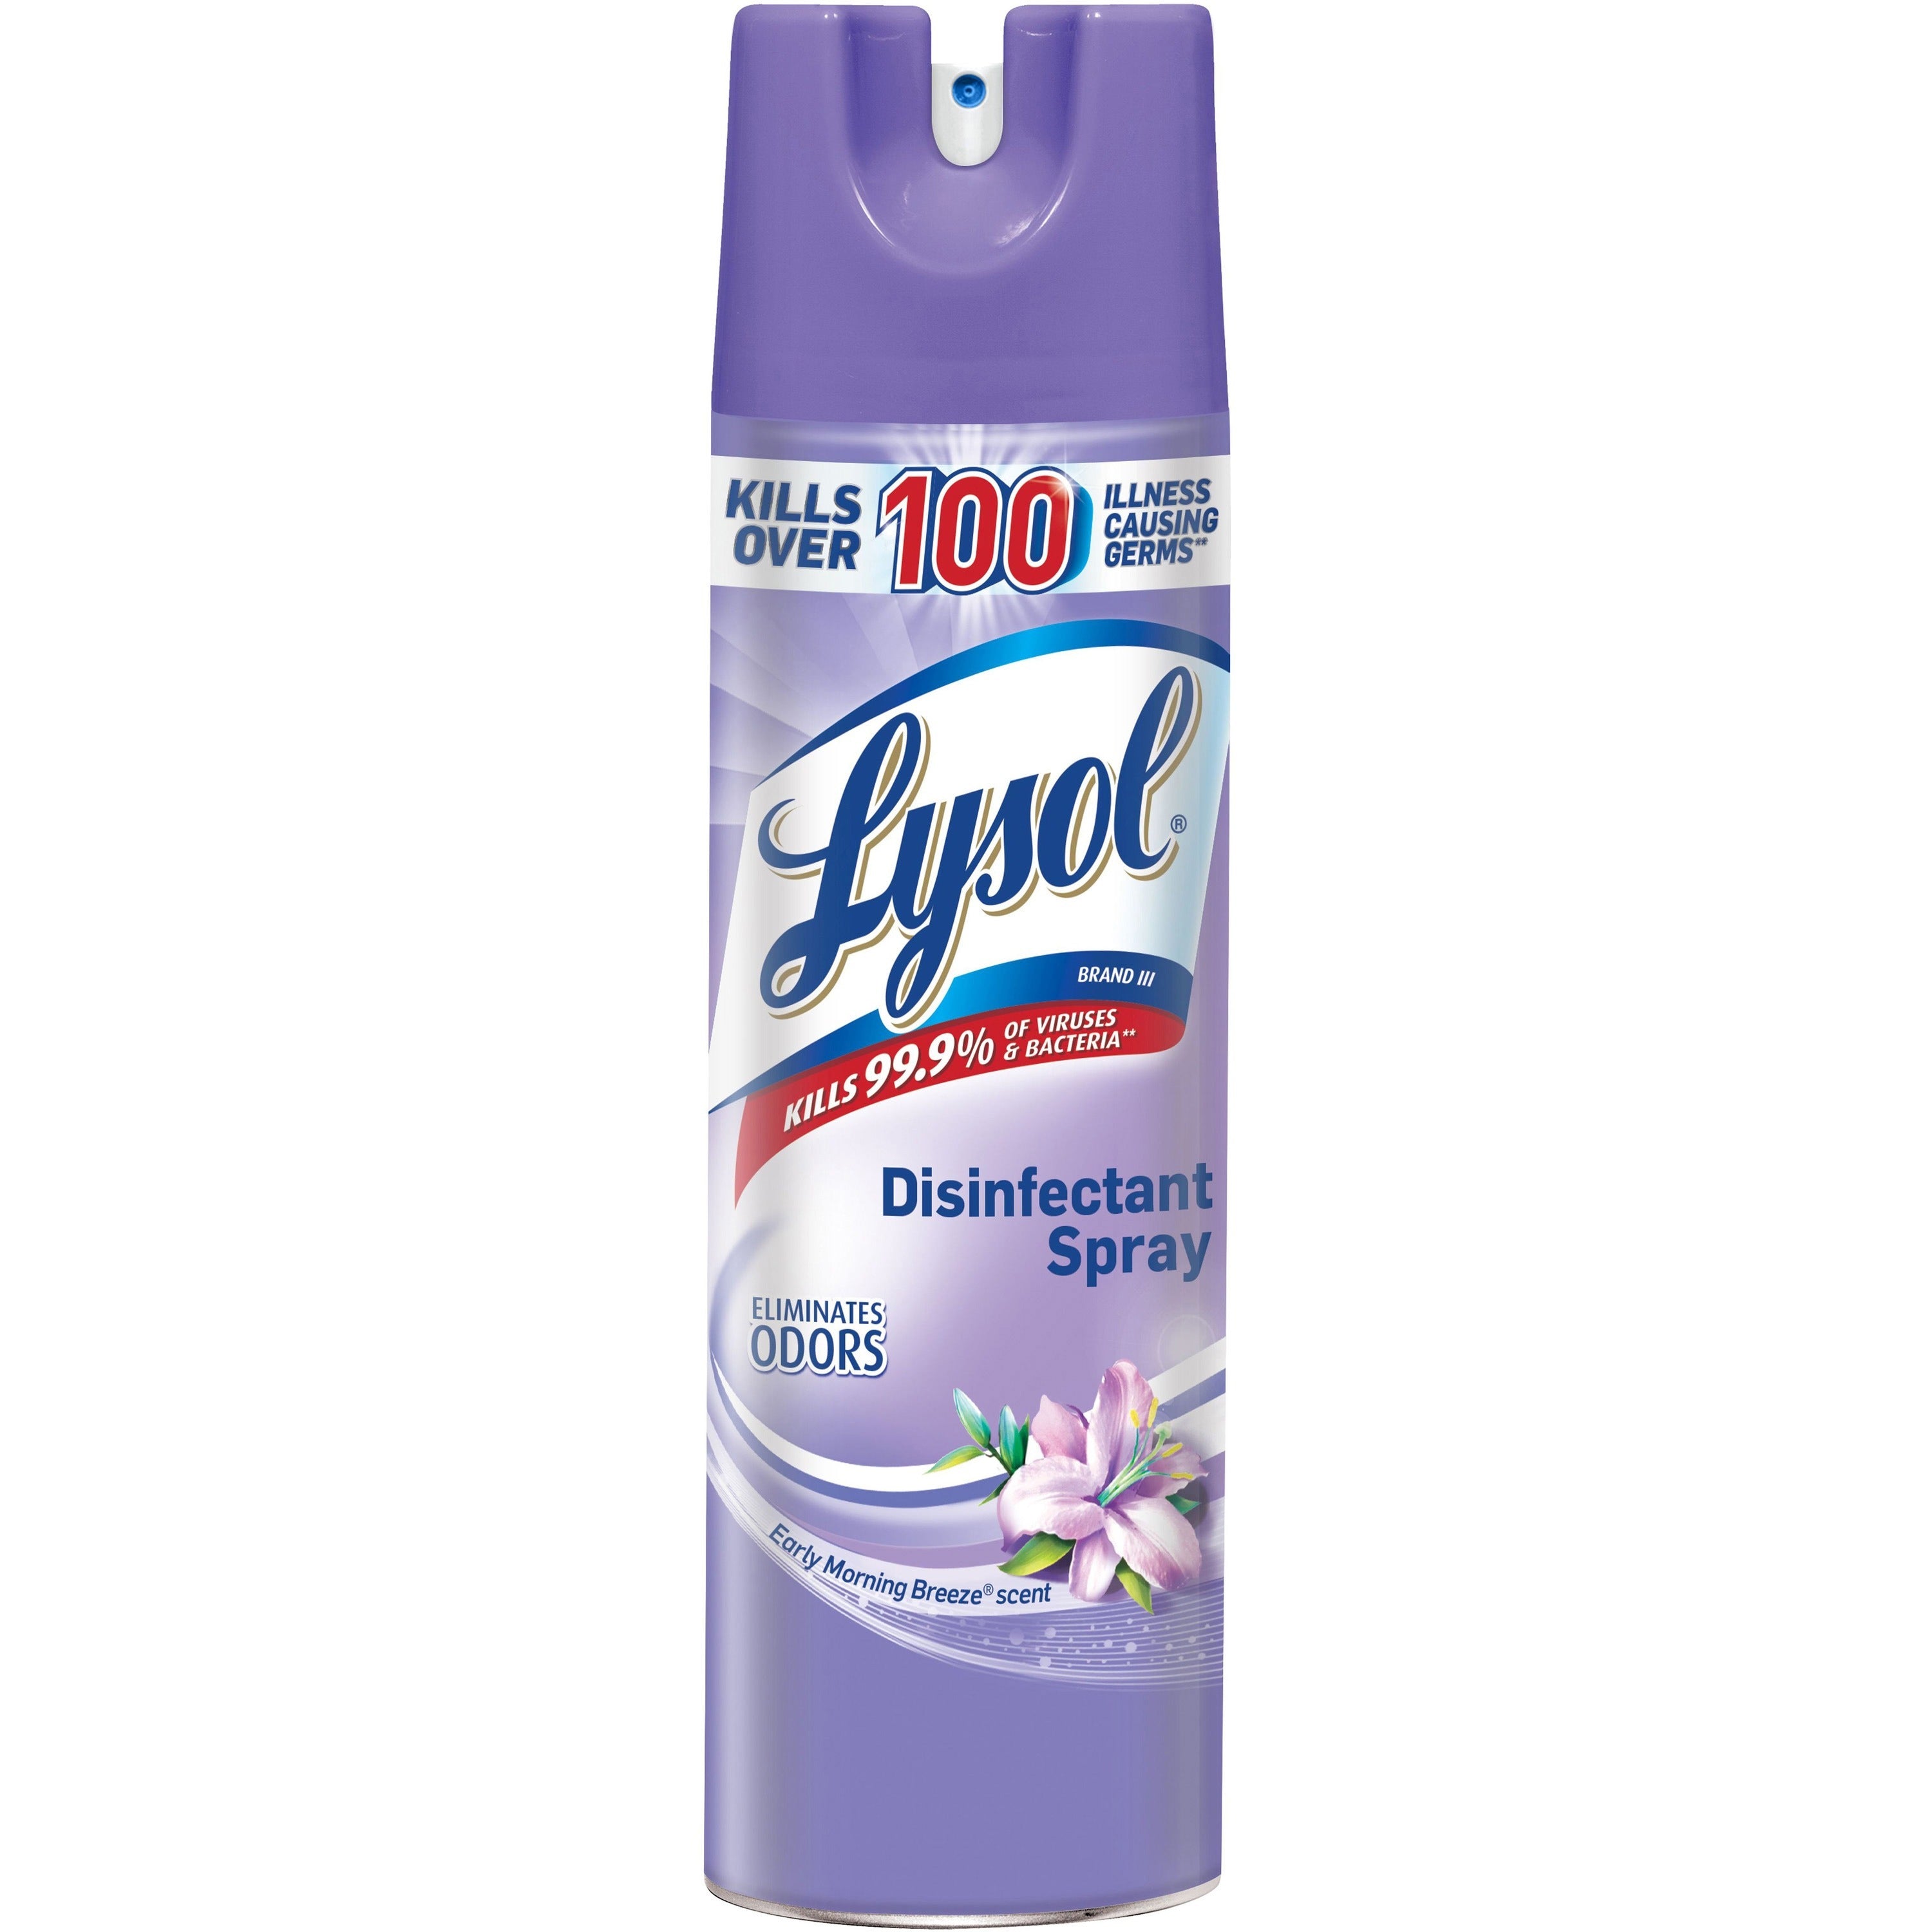 Lysol Early Morning Breeze Disinfectant Spray - For Multipurpose - 19 fl oz (0.6 quart) - Early Morning Breeze Scent - 1 Each - Antimicrobial, Anti-bacterial - Clear - 